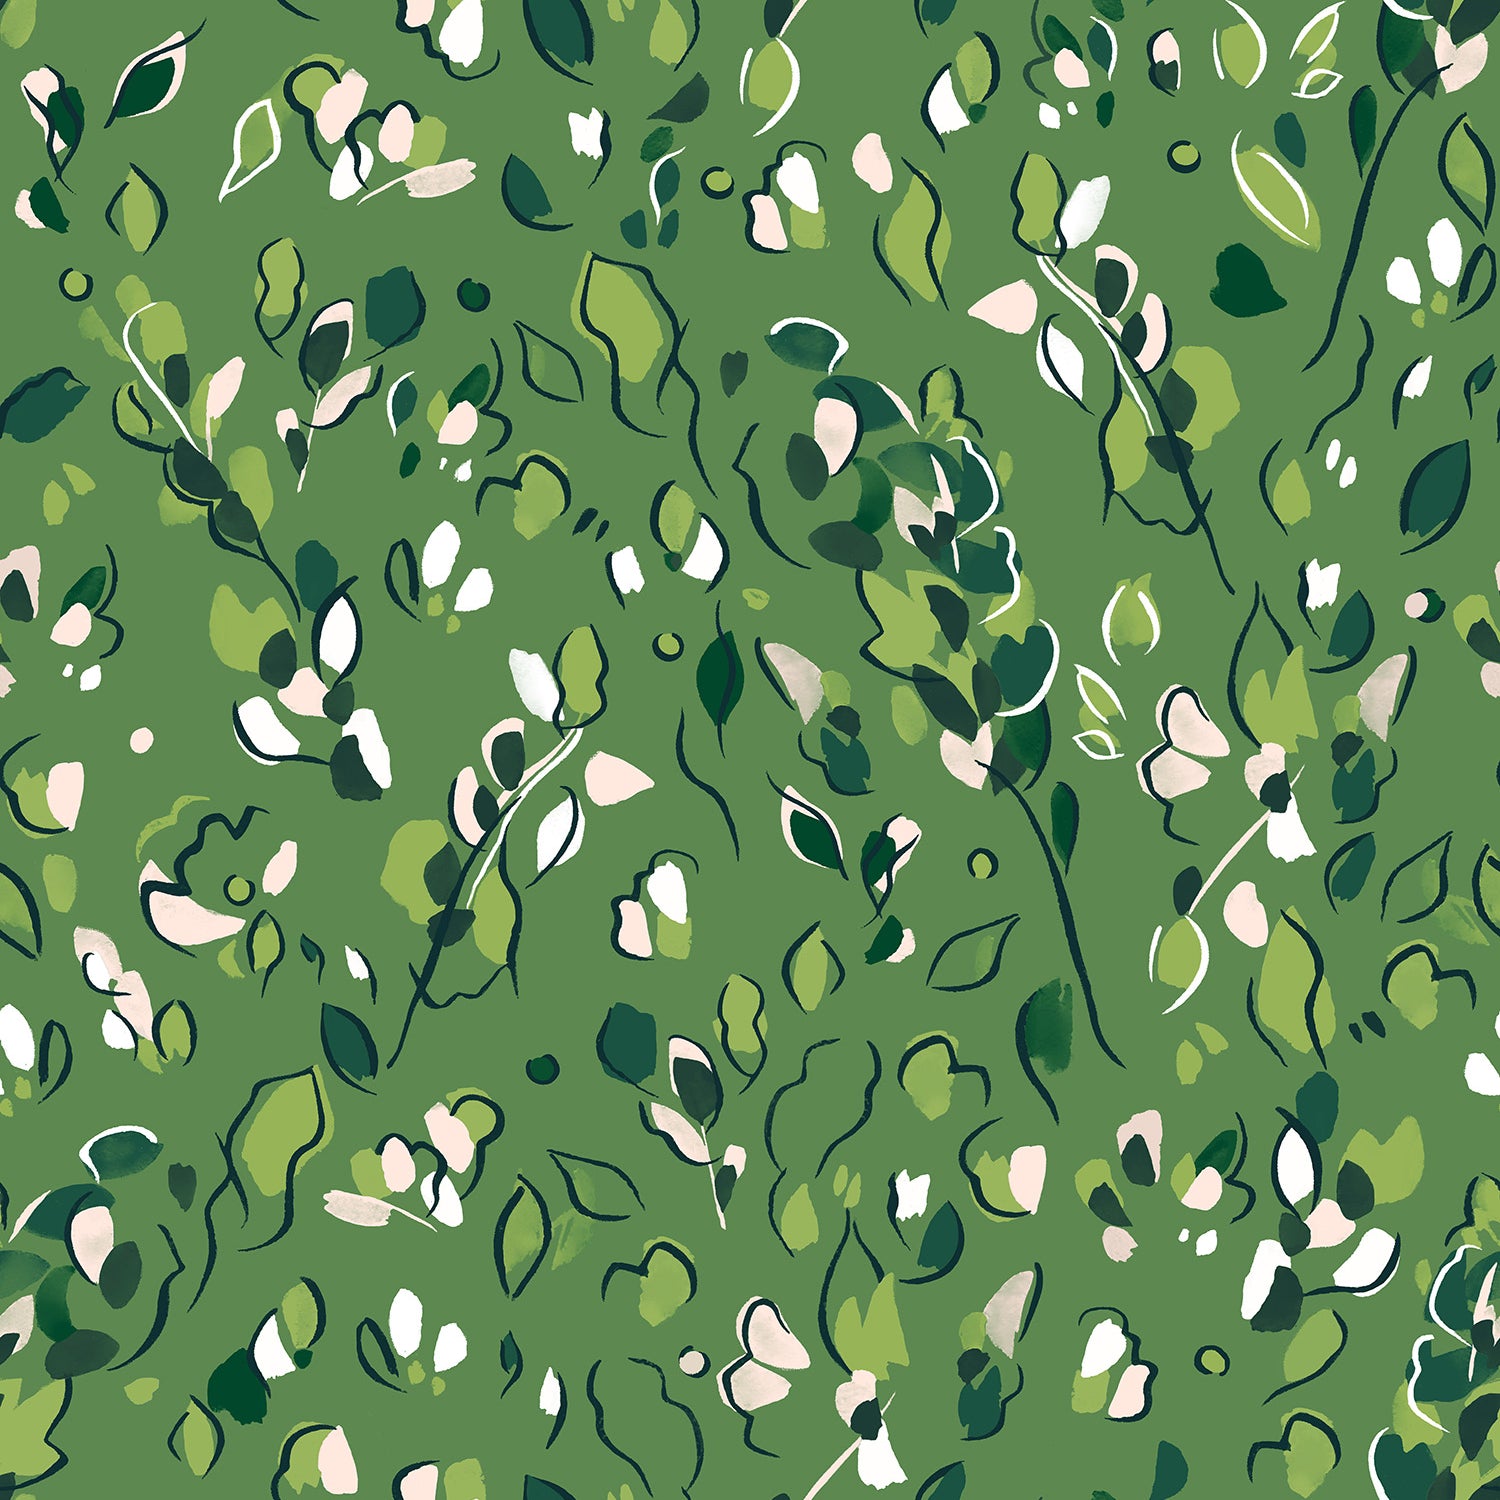 Detail of fabric in a painterly leaf print in shades of green and white on a kelly green field.